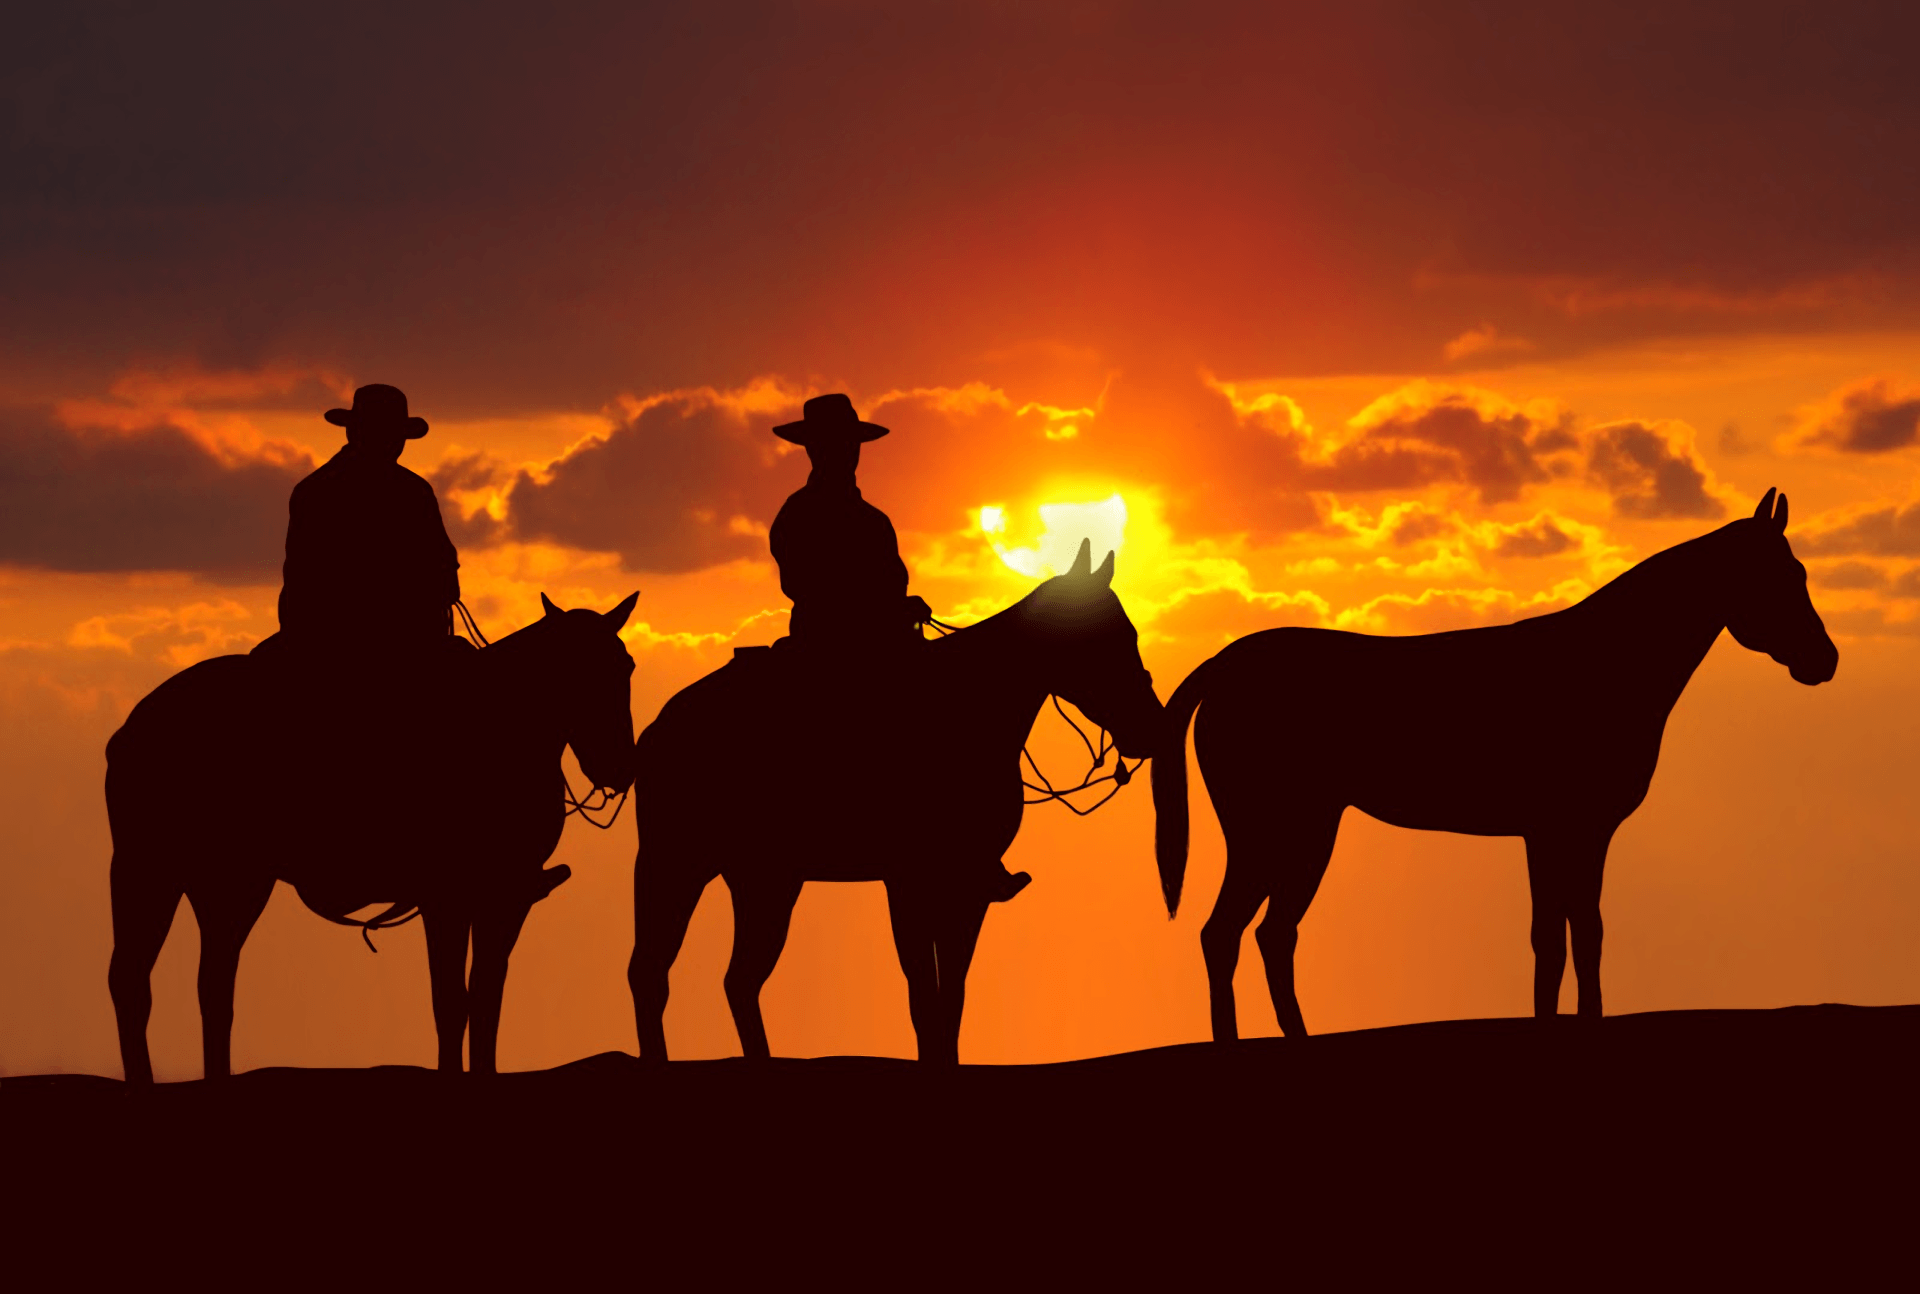 Cowboys in the Sunset Full HD Wallpaper